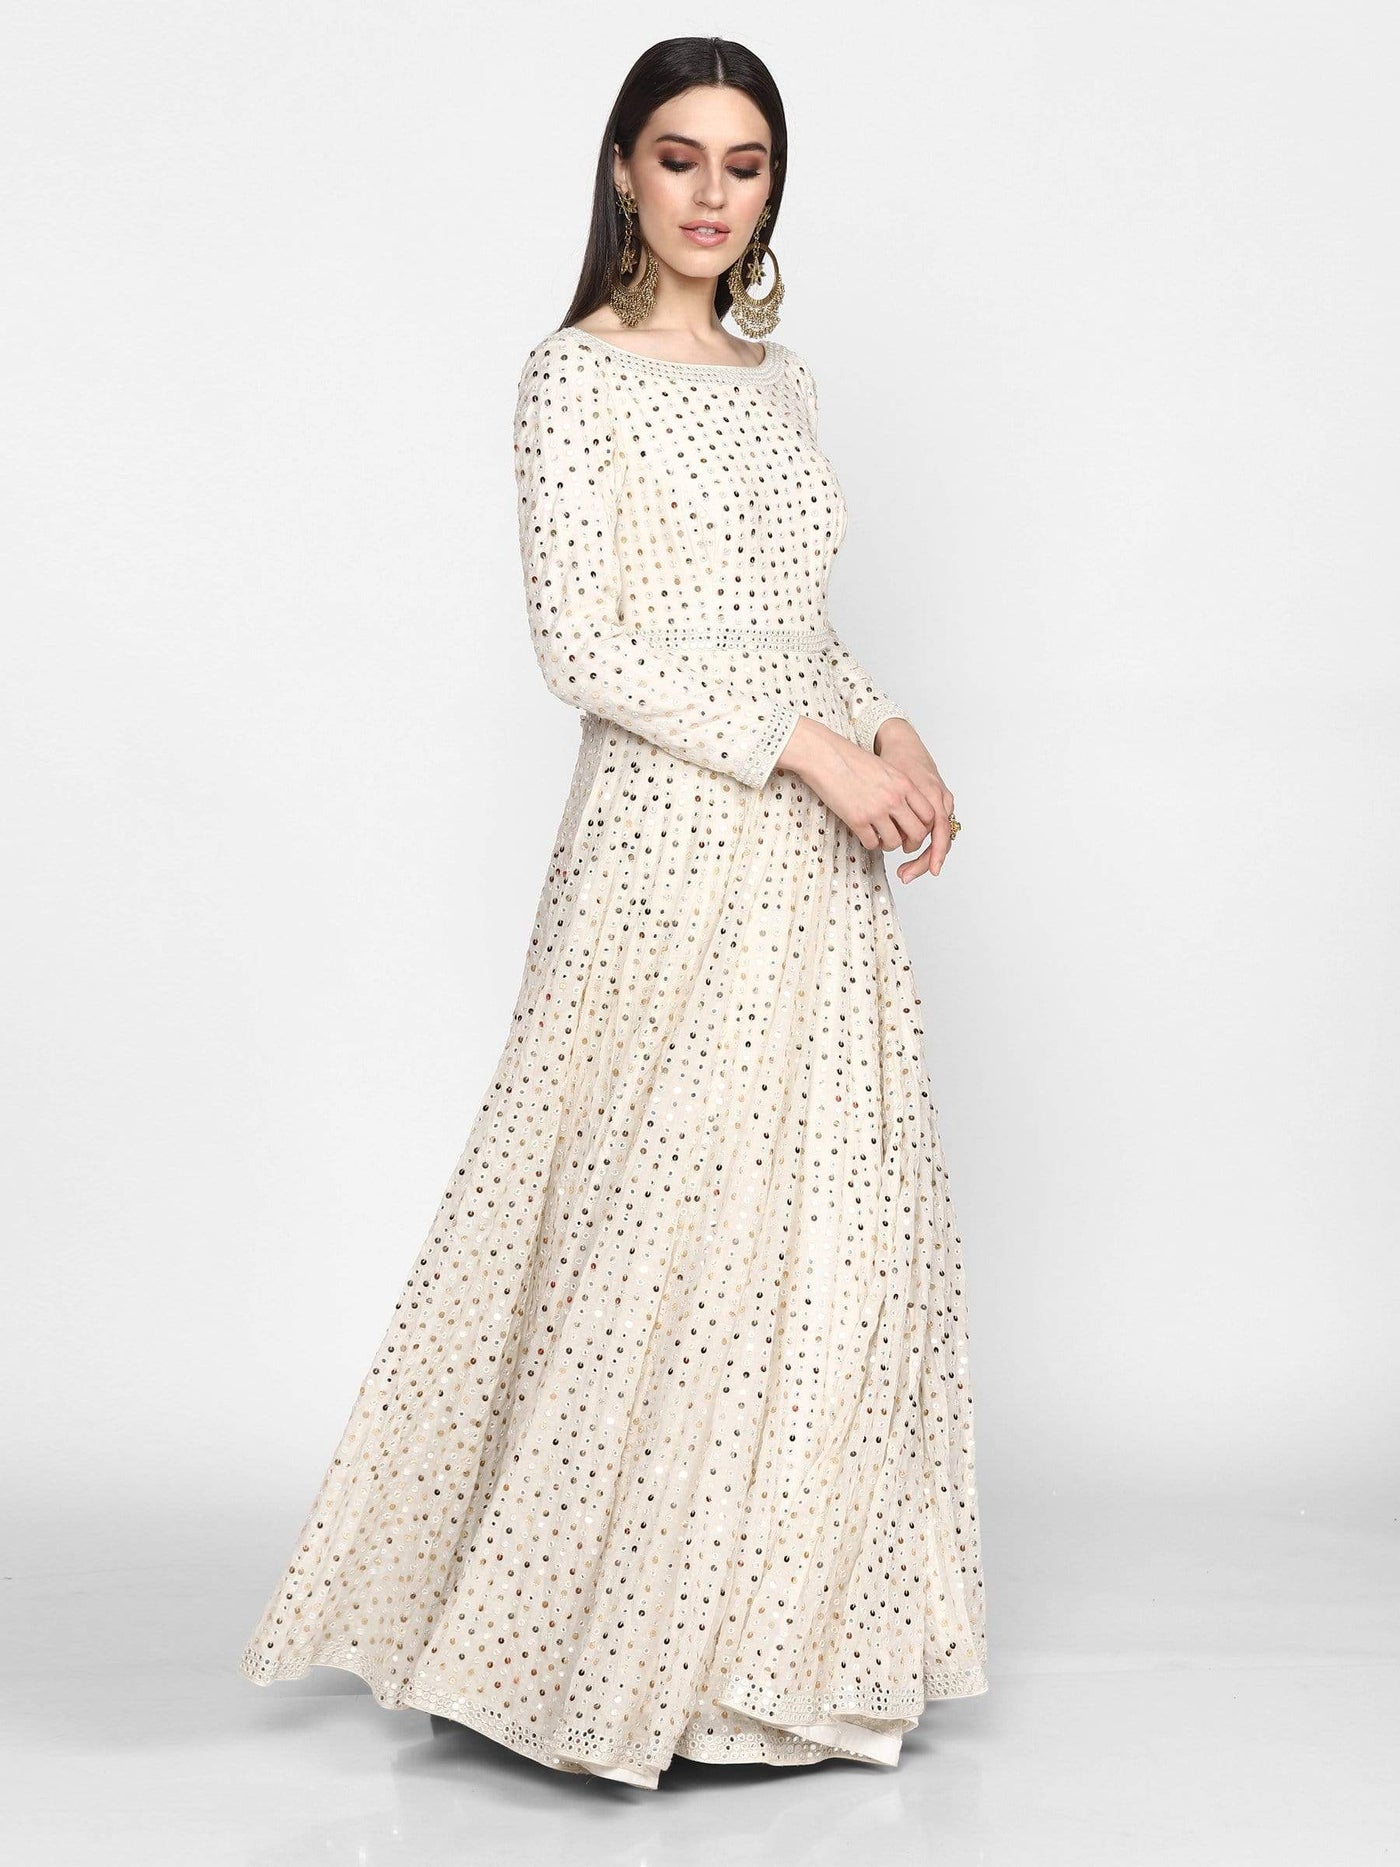 Off-White Anarkali Gown - Indian Clothing in Denver, CO, Aurora, CO, Boulder, CO, Fort Collins, CO, Colorado Springs, CO, Parker, CO, Highlands Ranch, CO, Cherry Creek, CO, Centennial, CO, and Longmont, CO. Nationwide shipping USA - India Fashion X